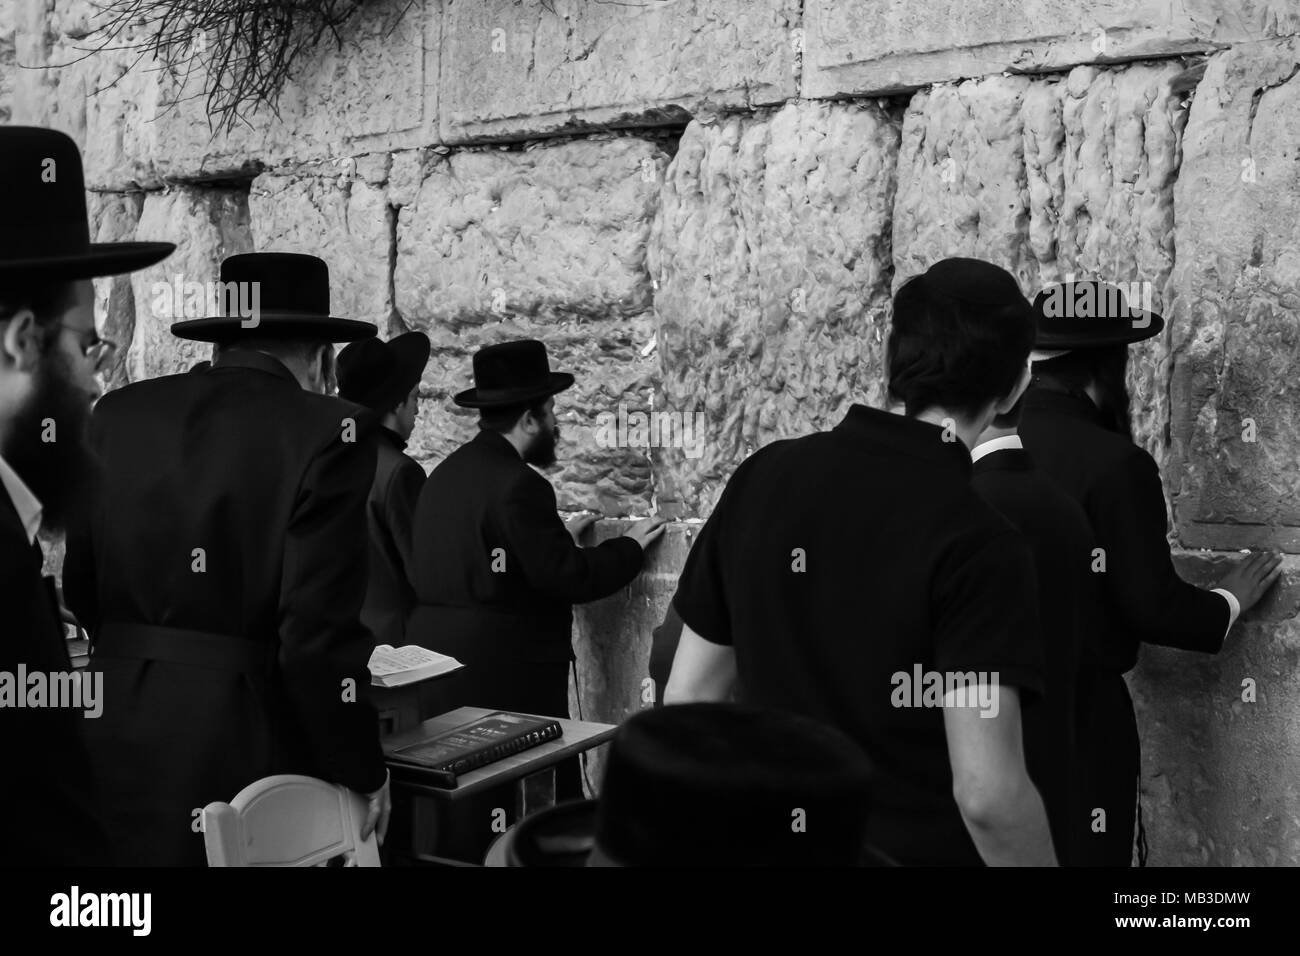 Western Wall, Jerusalem, Israel 03.04.2015: Western Wall Jerusalem is also called the wailing wall or wall of weeping. It is one of the holiest sites  Stock Photo